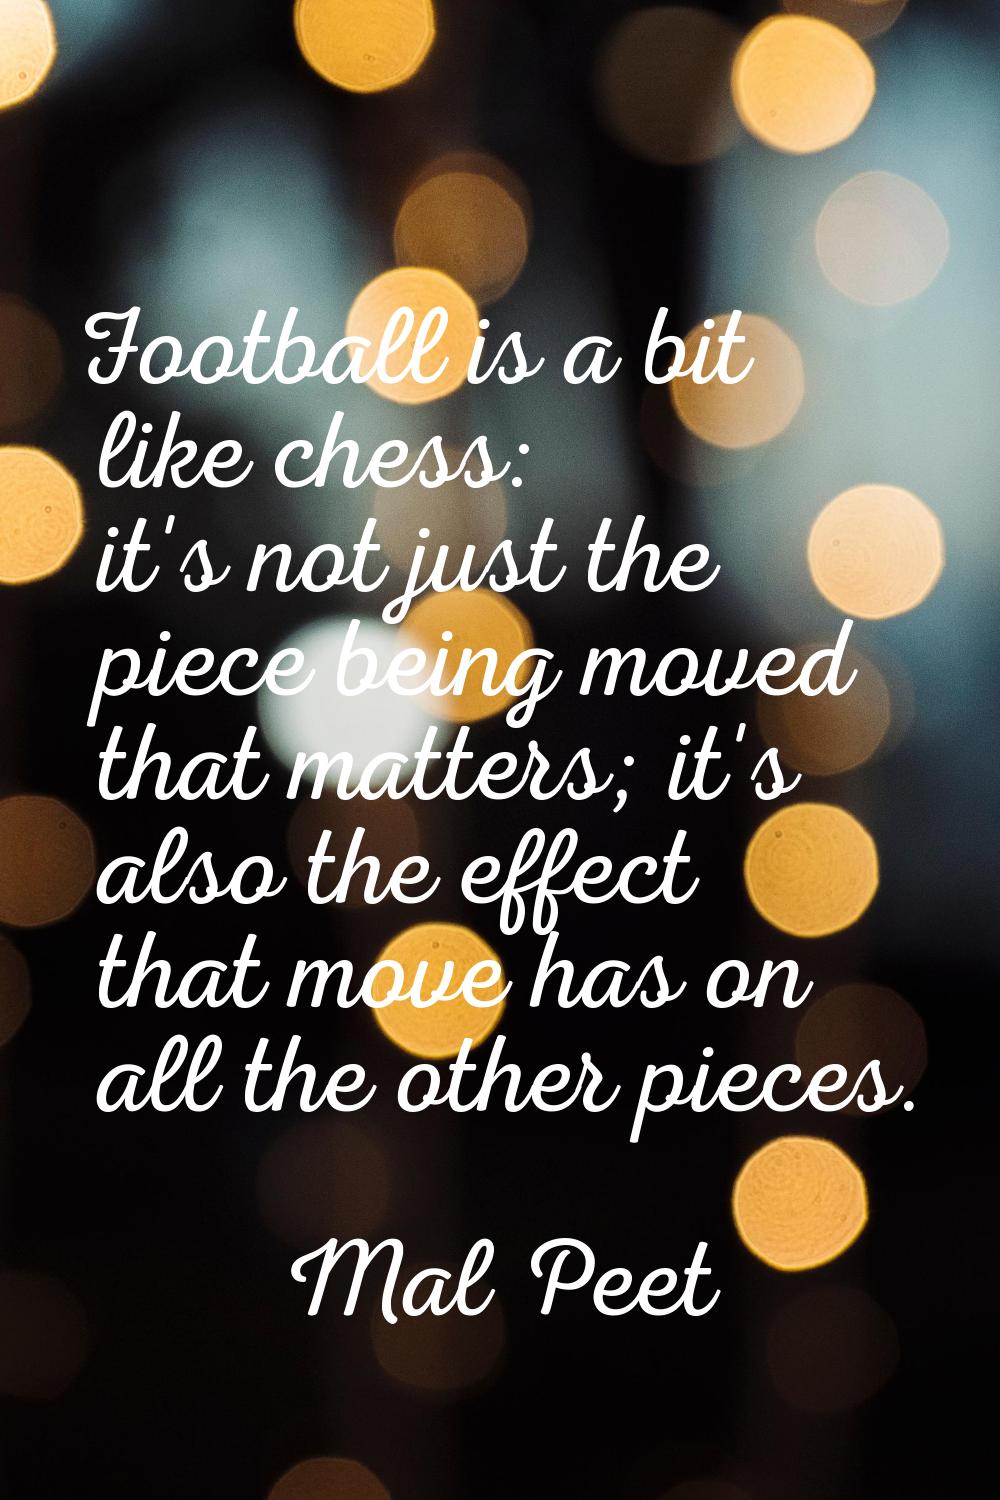 Football is a bit like chess: it's not just the piece being moved that matters; it's also the effec